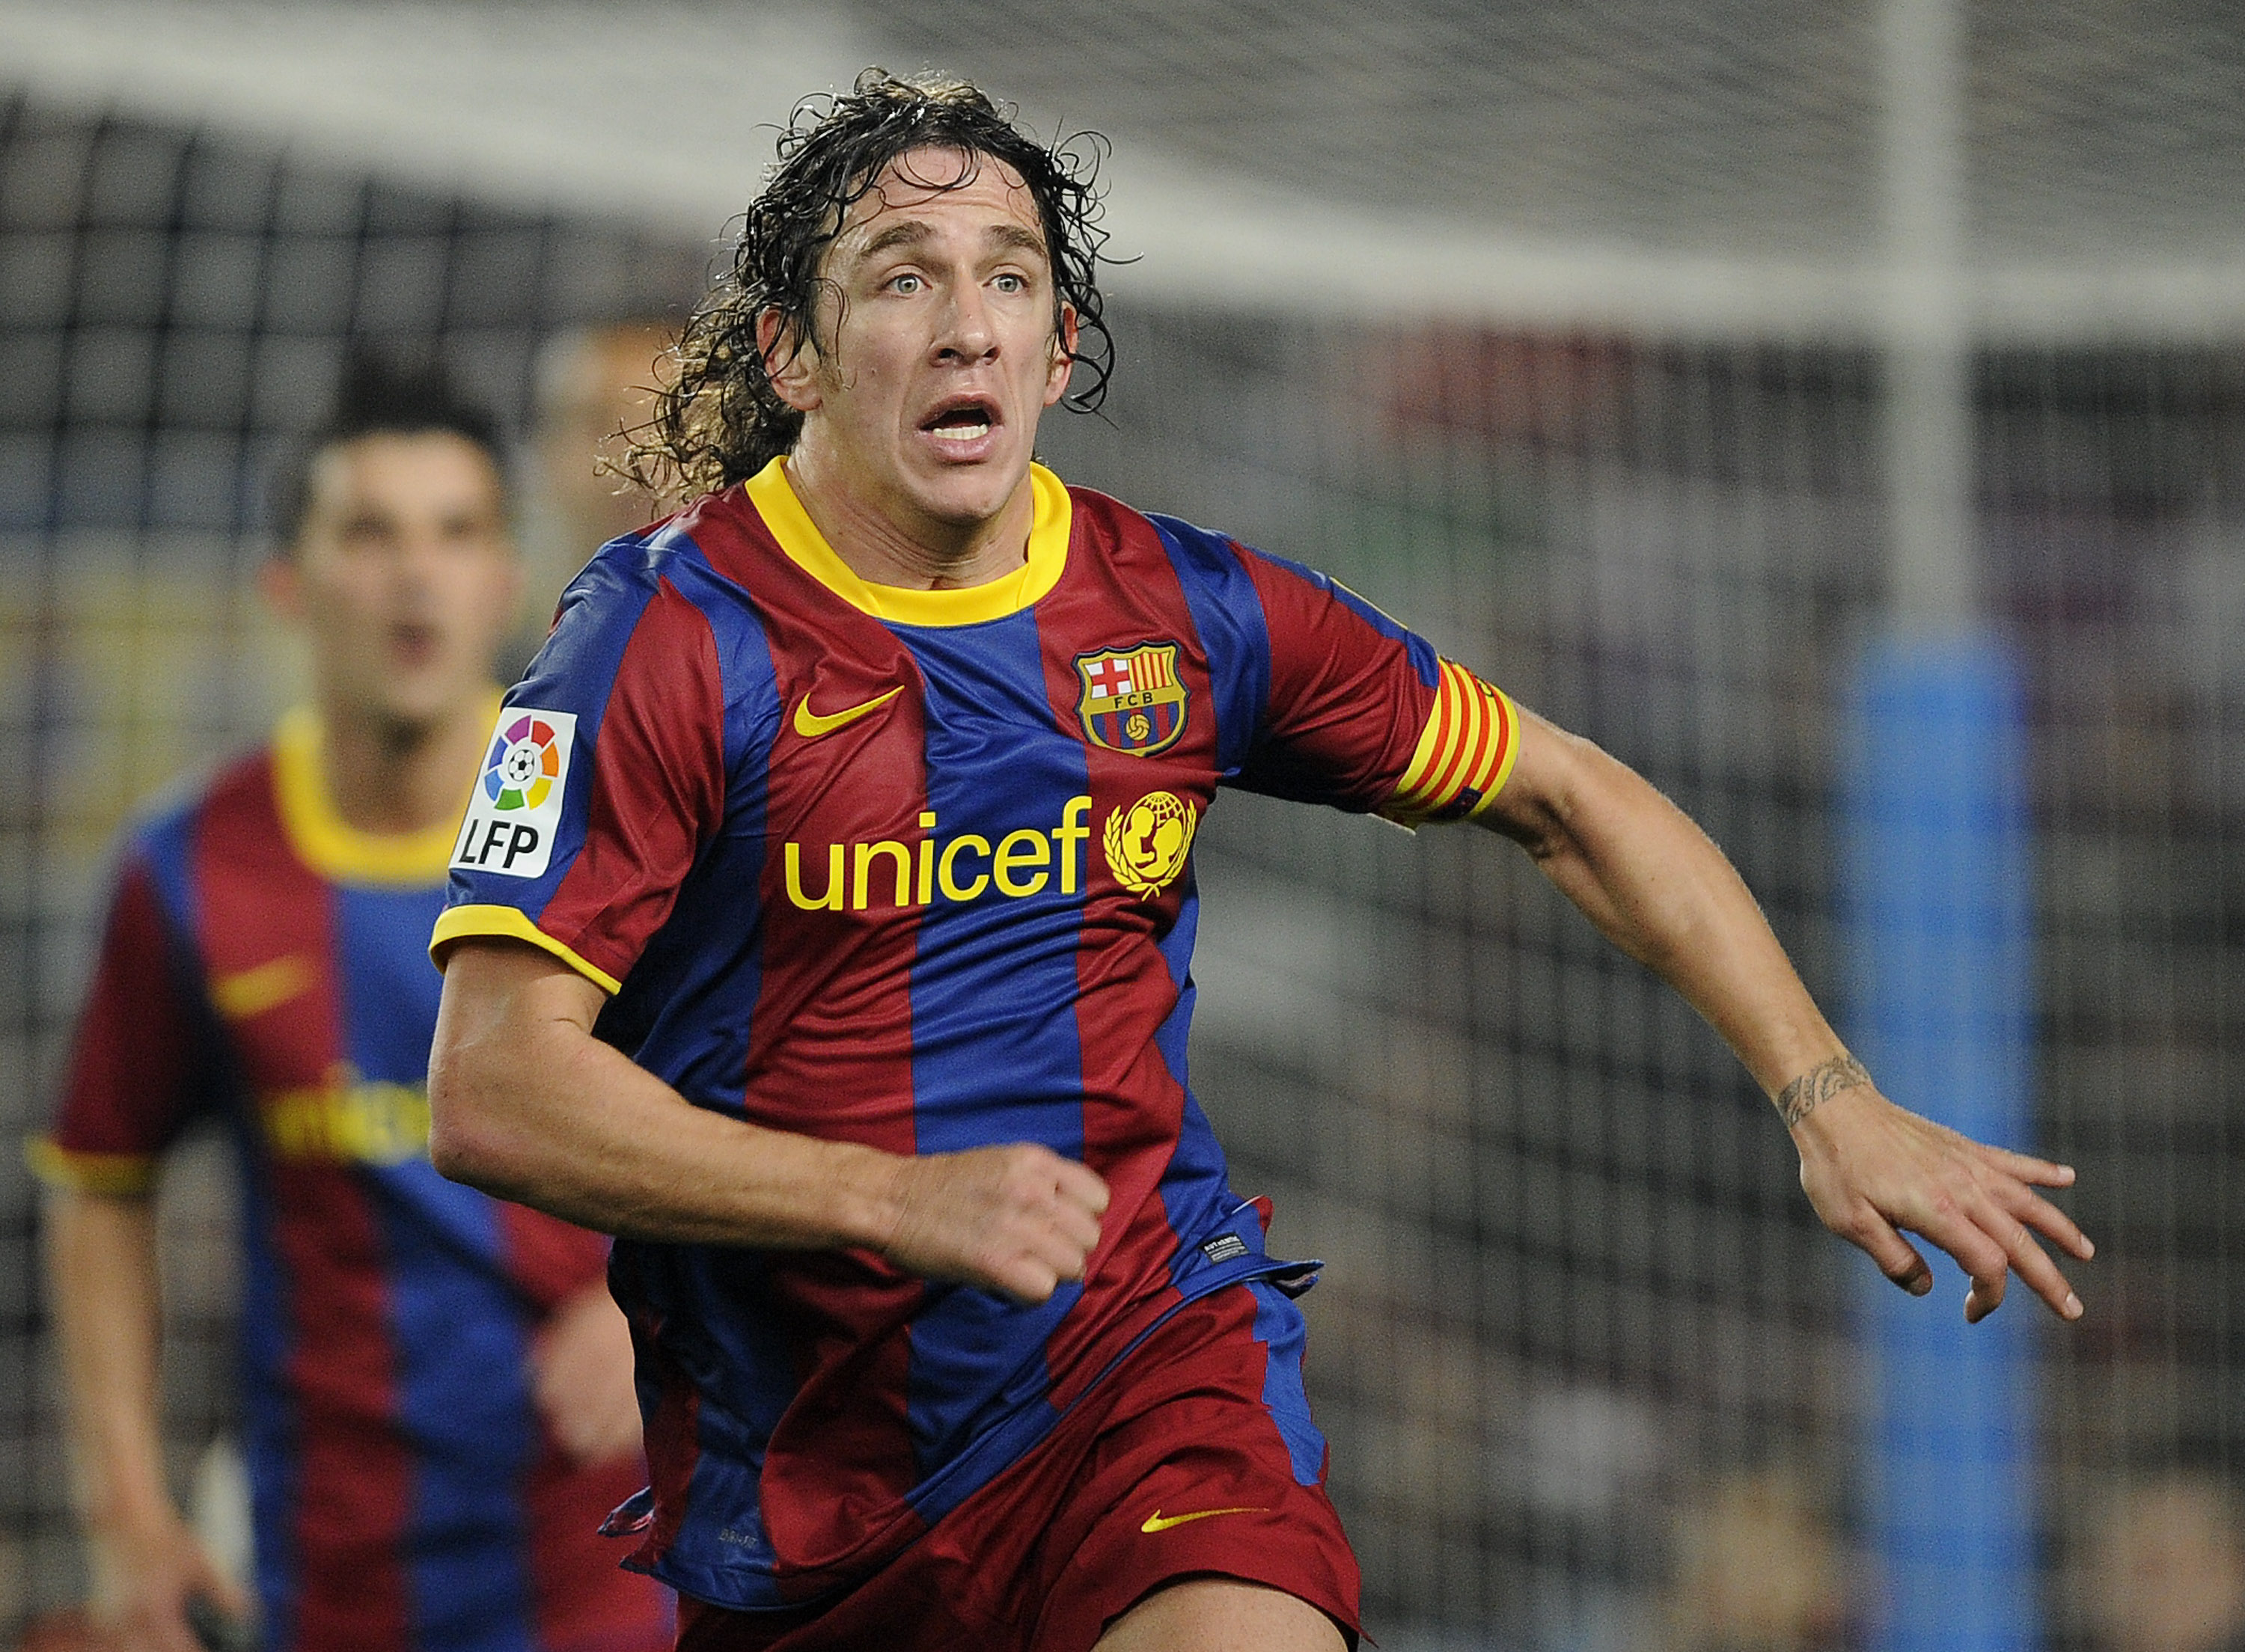 BARCELONA, SPAIN - JANUARY 16:  Carles Puyol of FC Barcelona looks on during the La Liga match between FC Barcelona and Malaga at Nou Camp on January 16, 2011 in Barcelona, Spain. Barcelona won 4-1.  (Photo by David Ramos/Getty Images)